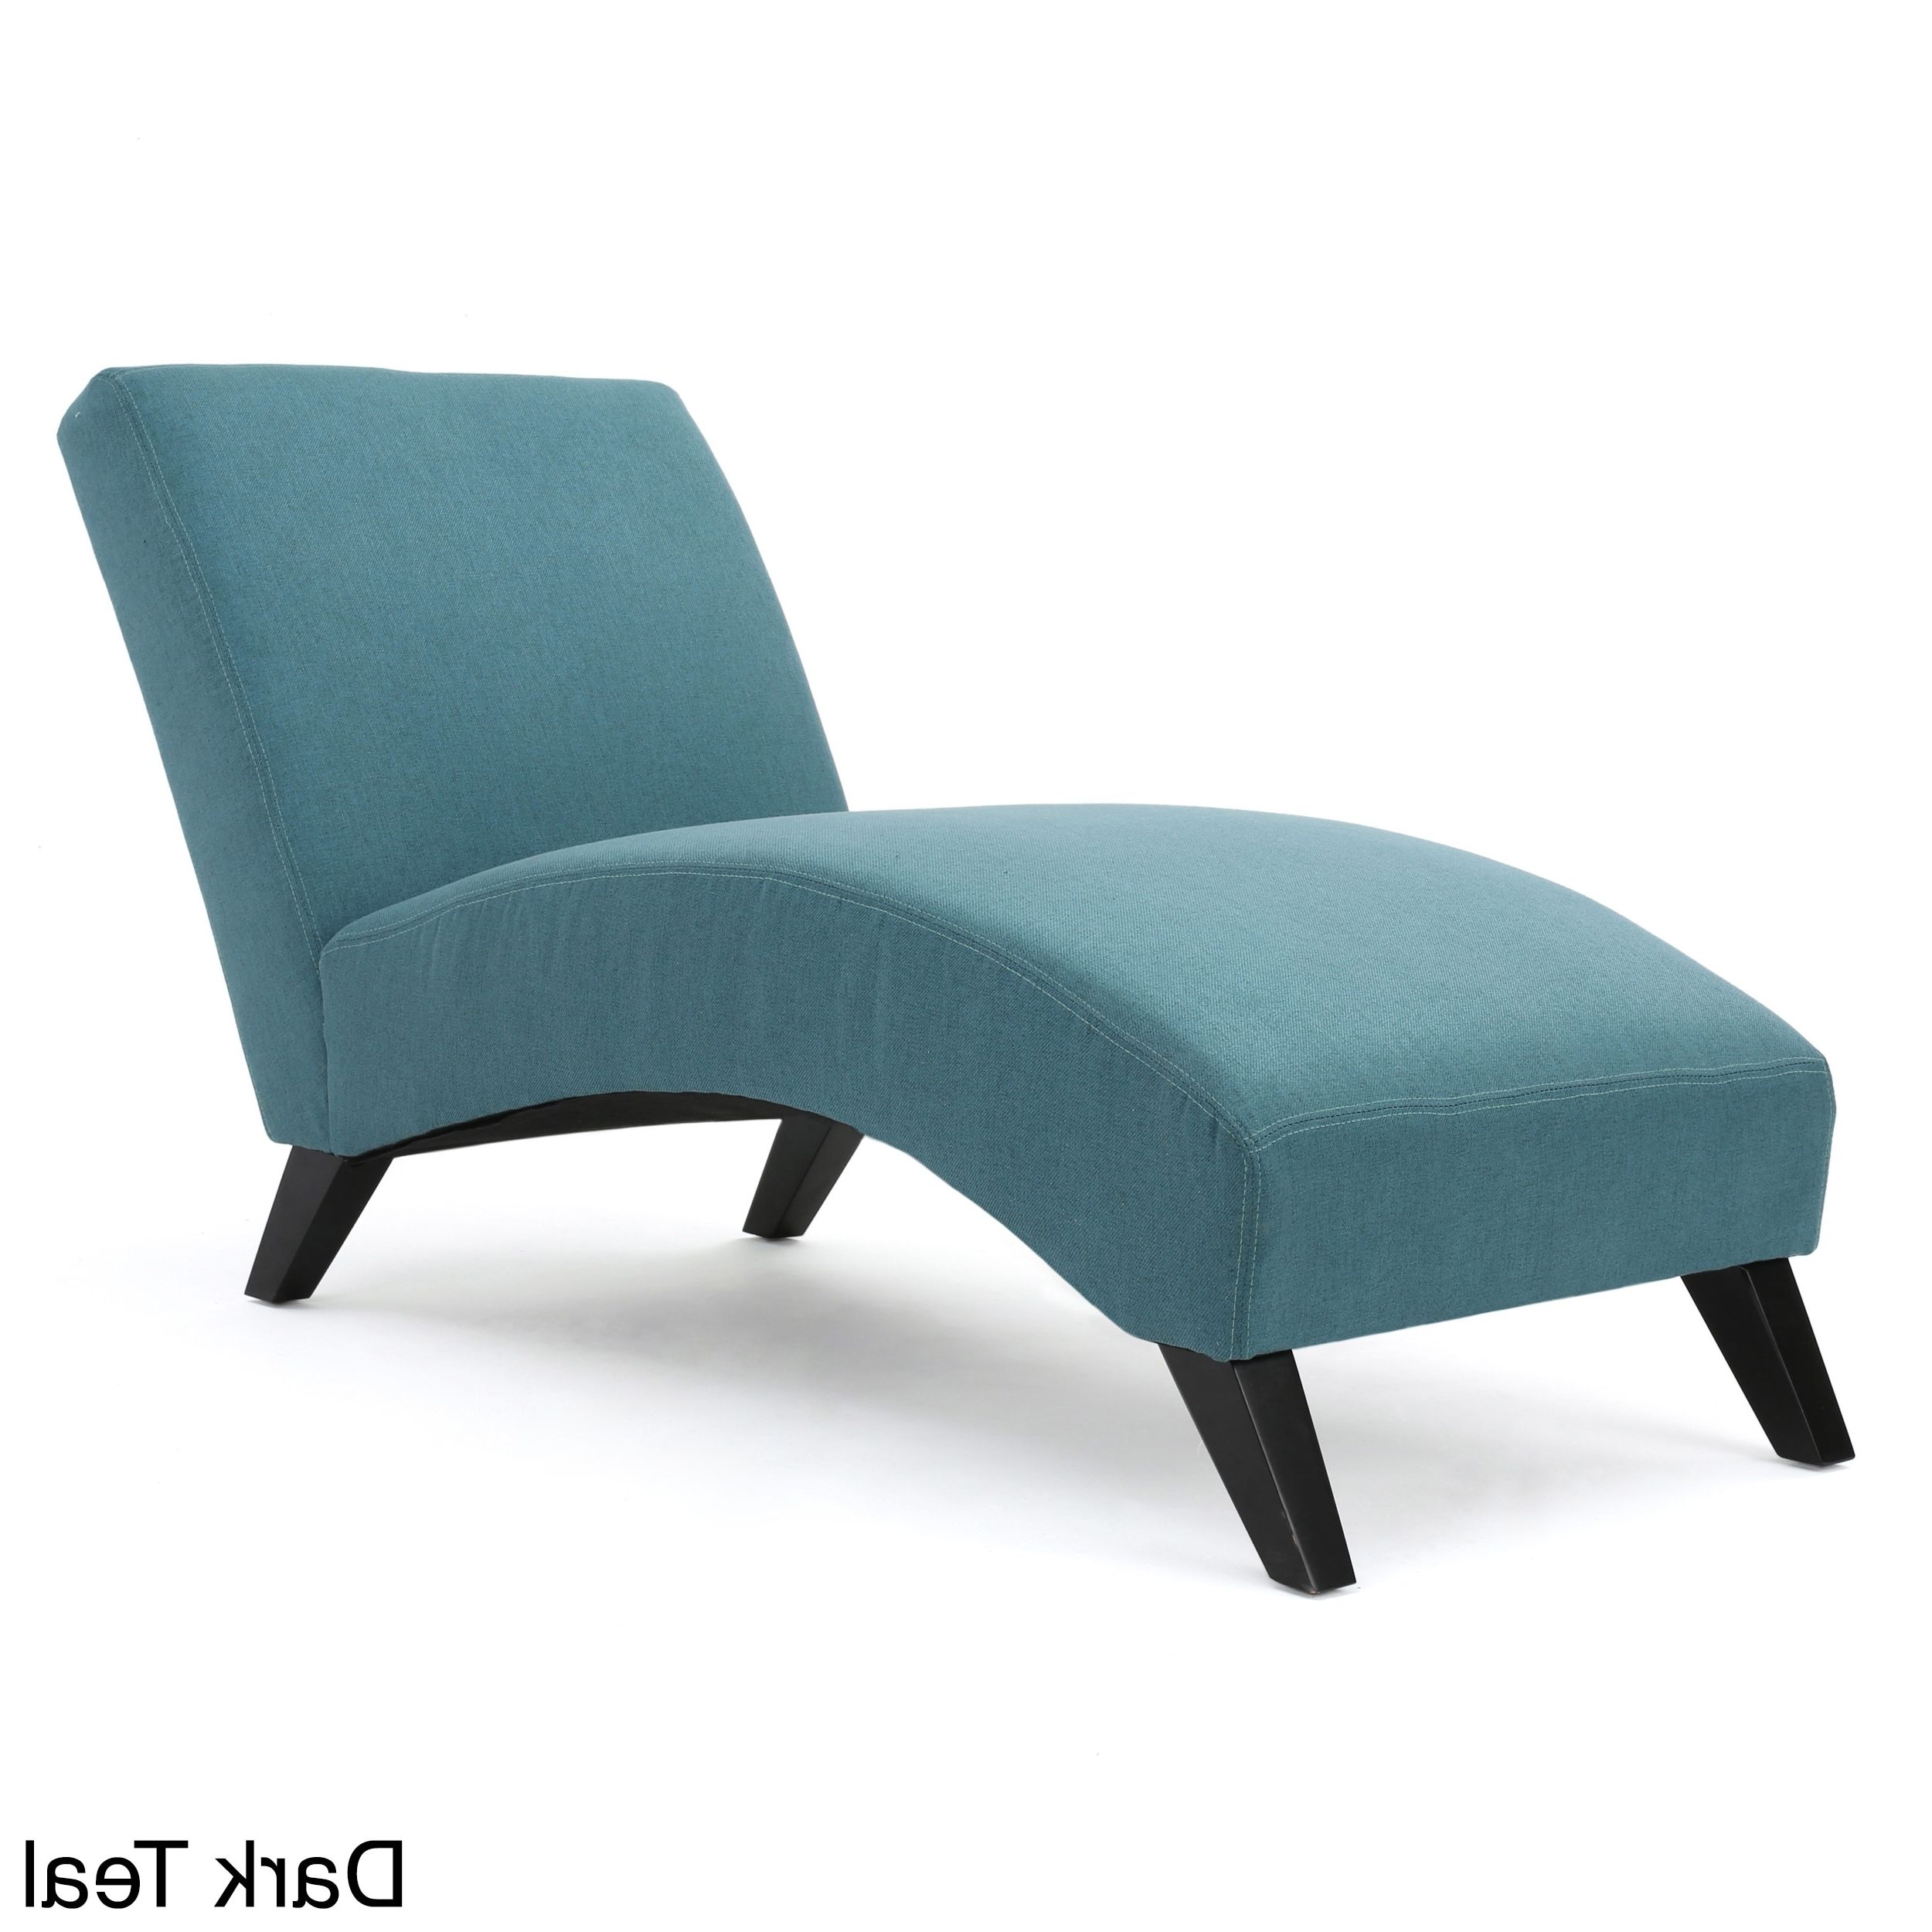 Teal Chaise Lounges Intended For Current Finlay Fabric Chaise Loungechristopher Knight Home – Free (View 9 of 15)